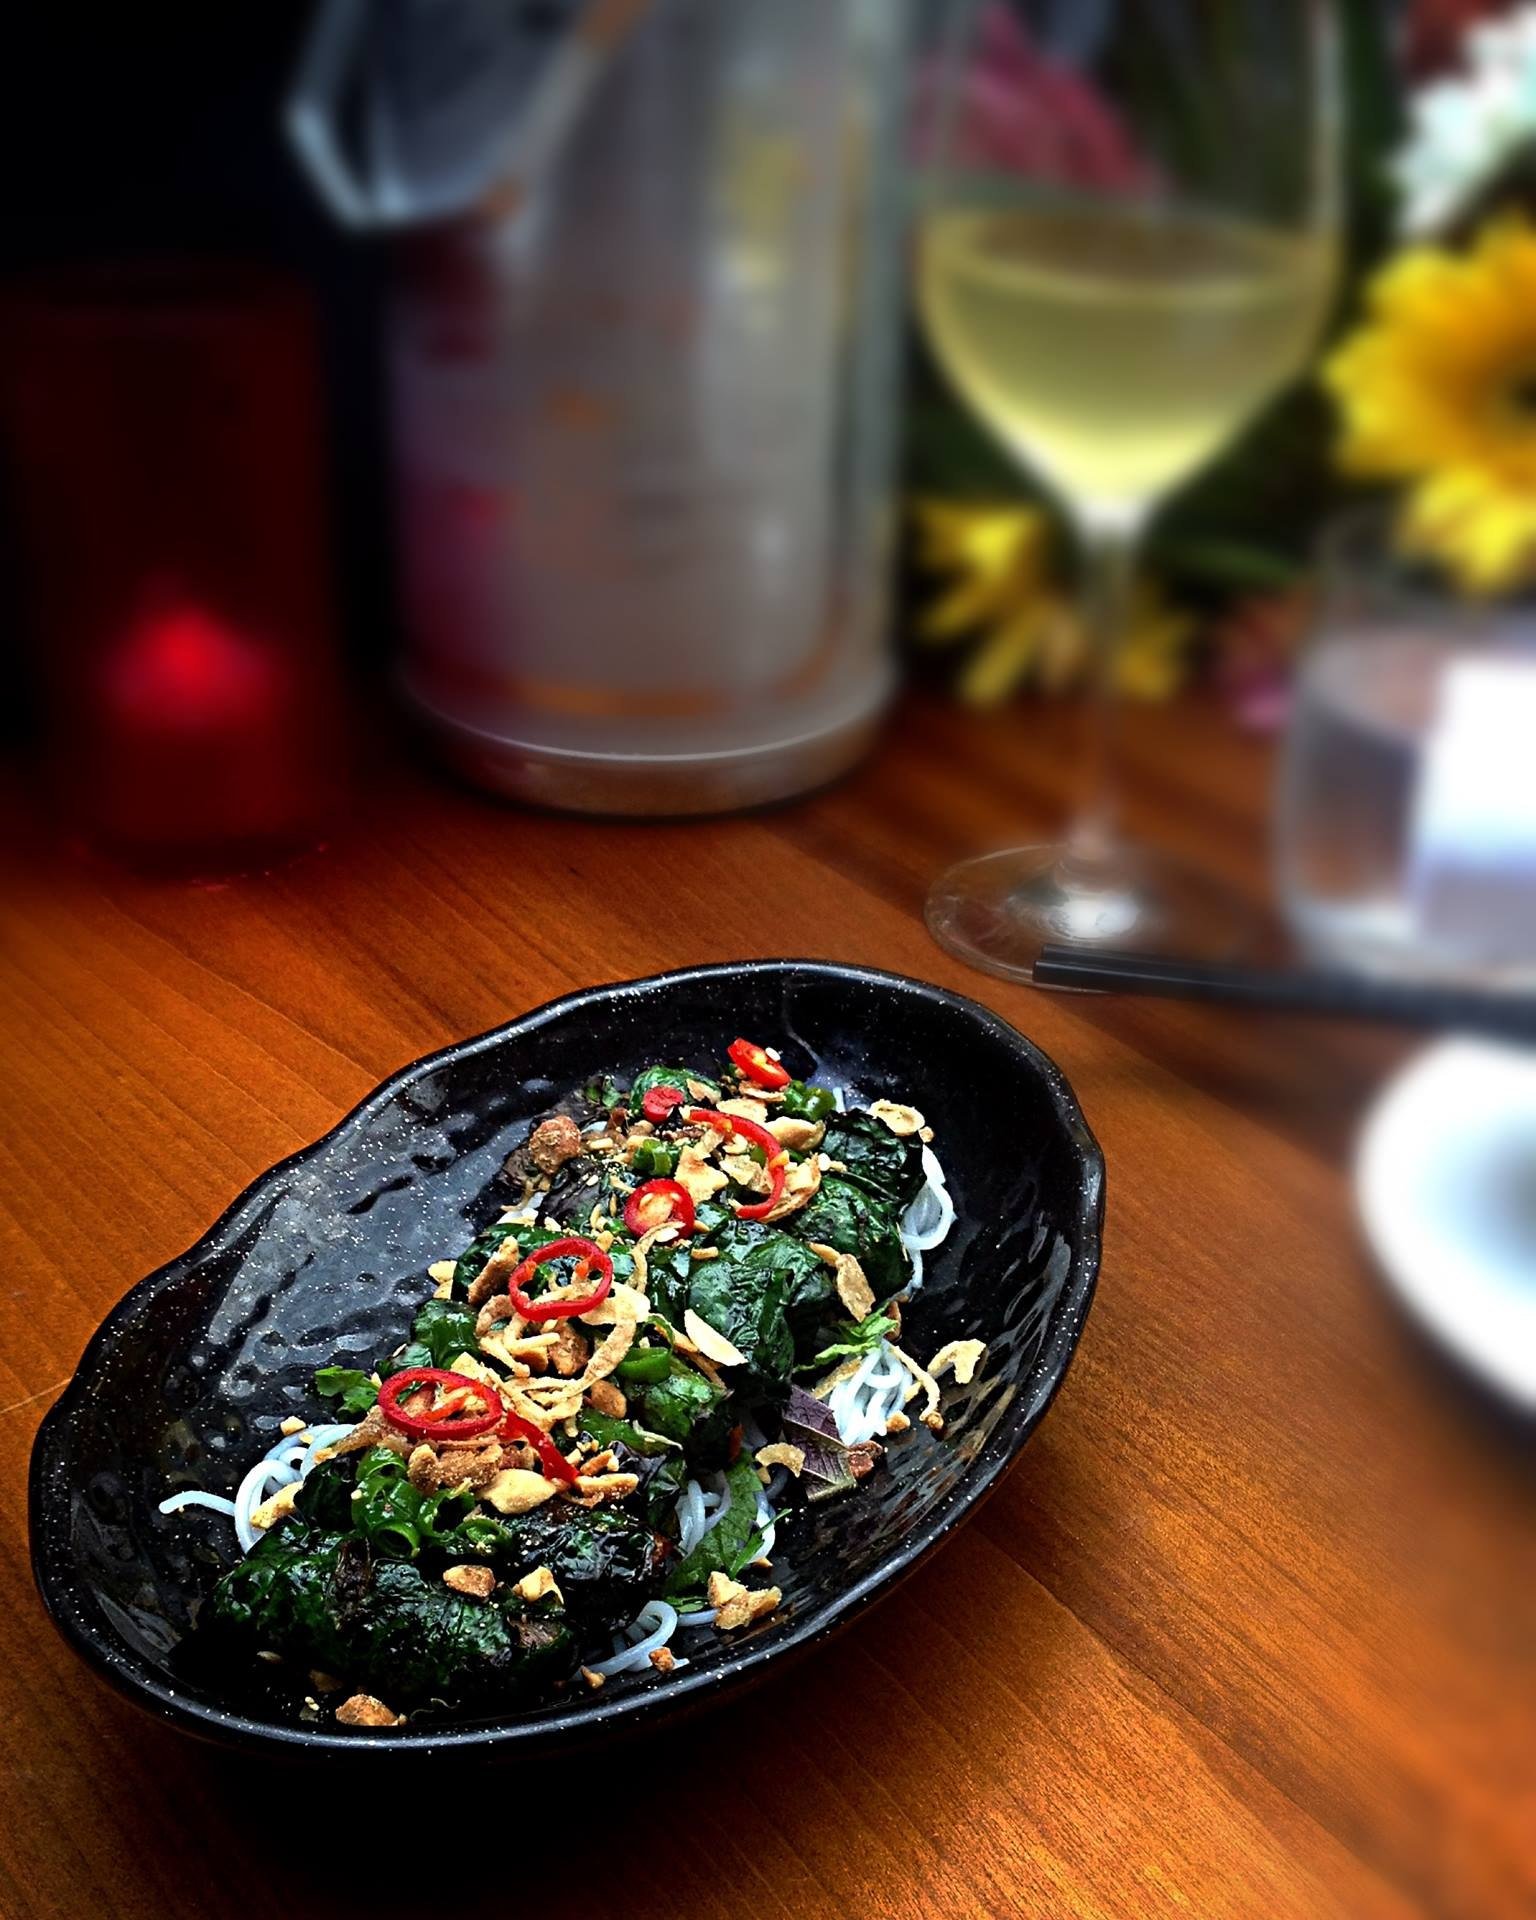 A Vietnamese CLASSIC to add to your order at Red Lantern tonight - B&ograve; L&aacute; Lốt - Char Grilled Wagyu Beef Wrapped in Betel Leaves, served with Pickles and Rice Noodles.

These DELECTABLE morsels are CHAR GRILLED to PERFECTION making them t